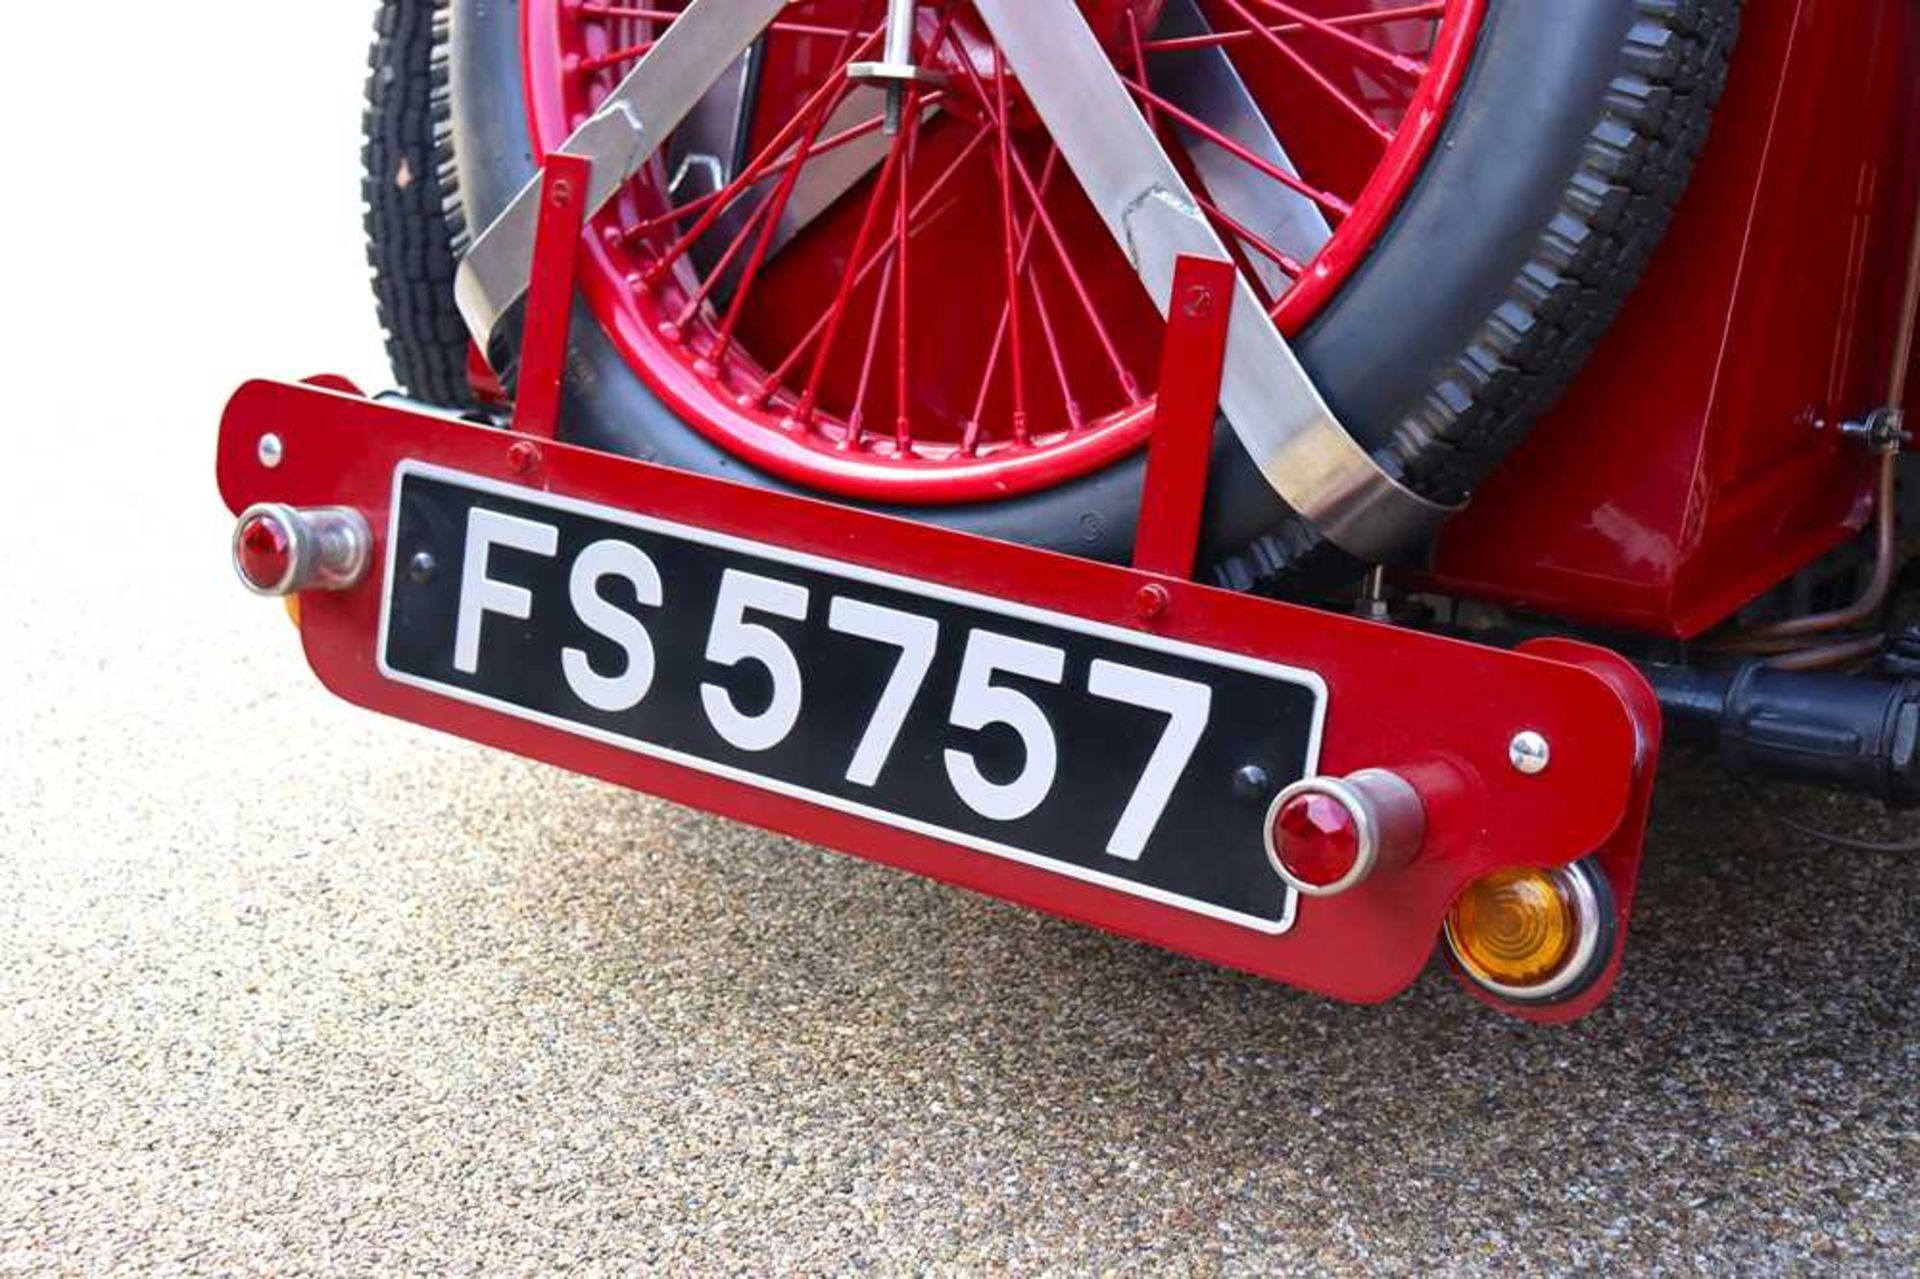 1932 MG J2 Midget Excellently restored and with period competition history - Image 37 of 76